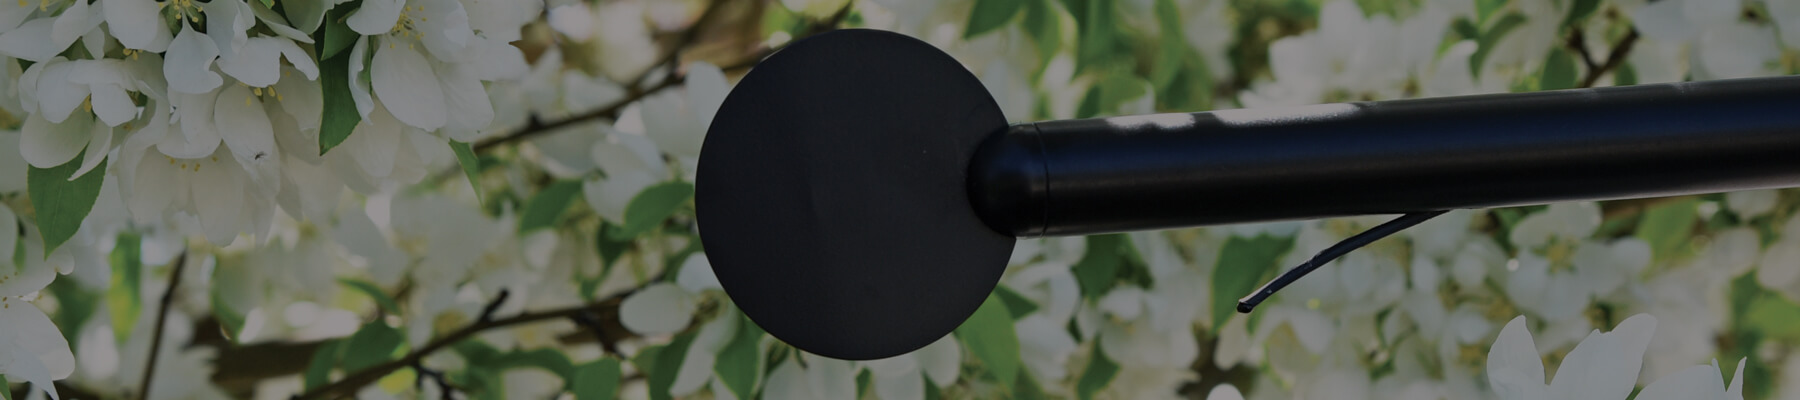 The Apogee Instruments leaf and bud temperature sensor provides an effective prediction of leaf and bud temperatures for orchards.